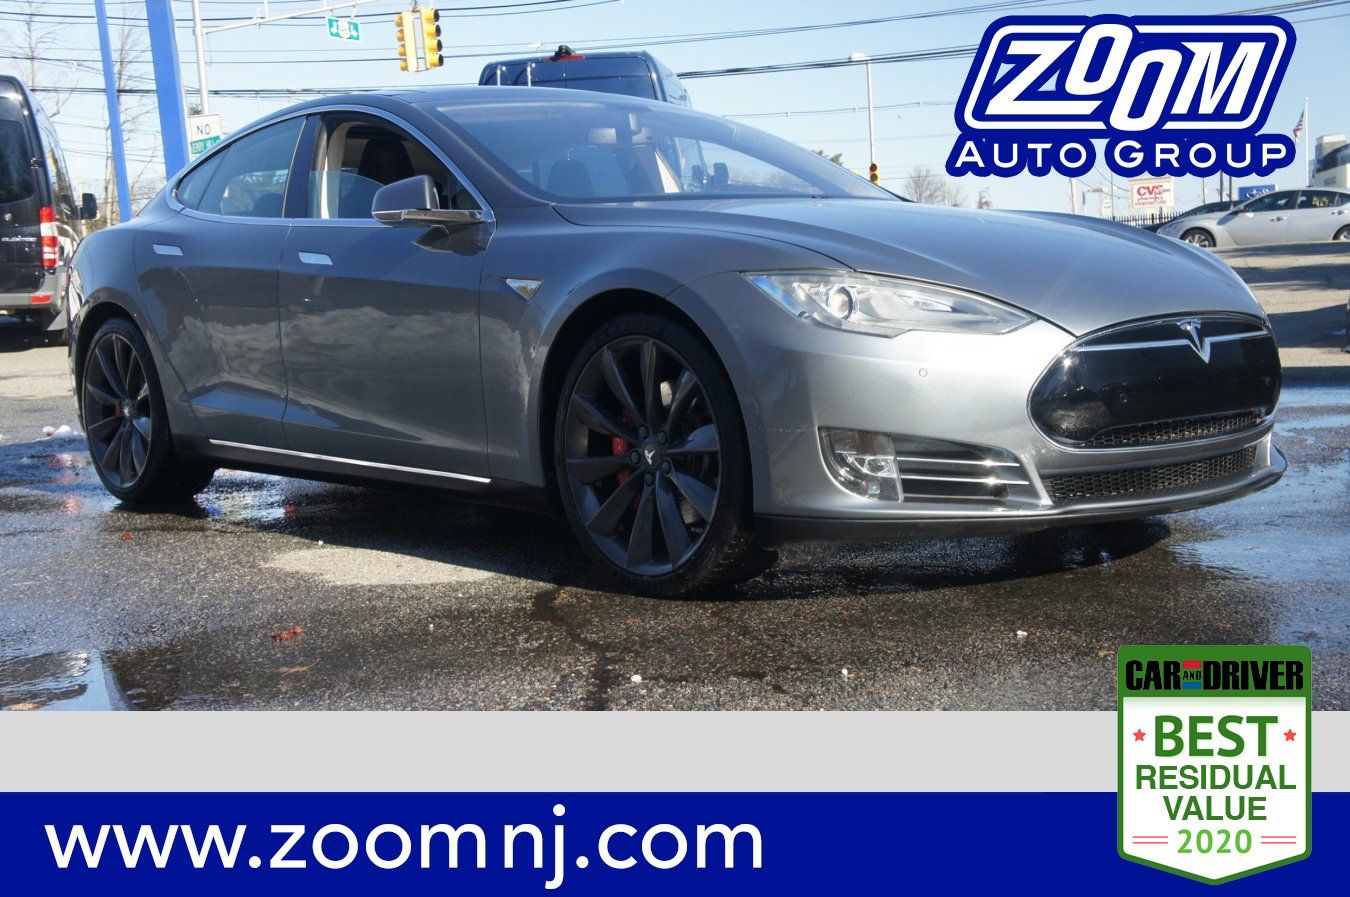 2014 Tesla Model S P85+  Zoom Auto Group - Used Cars New Jersey